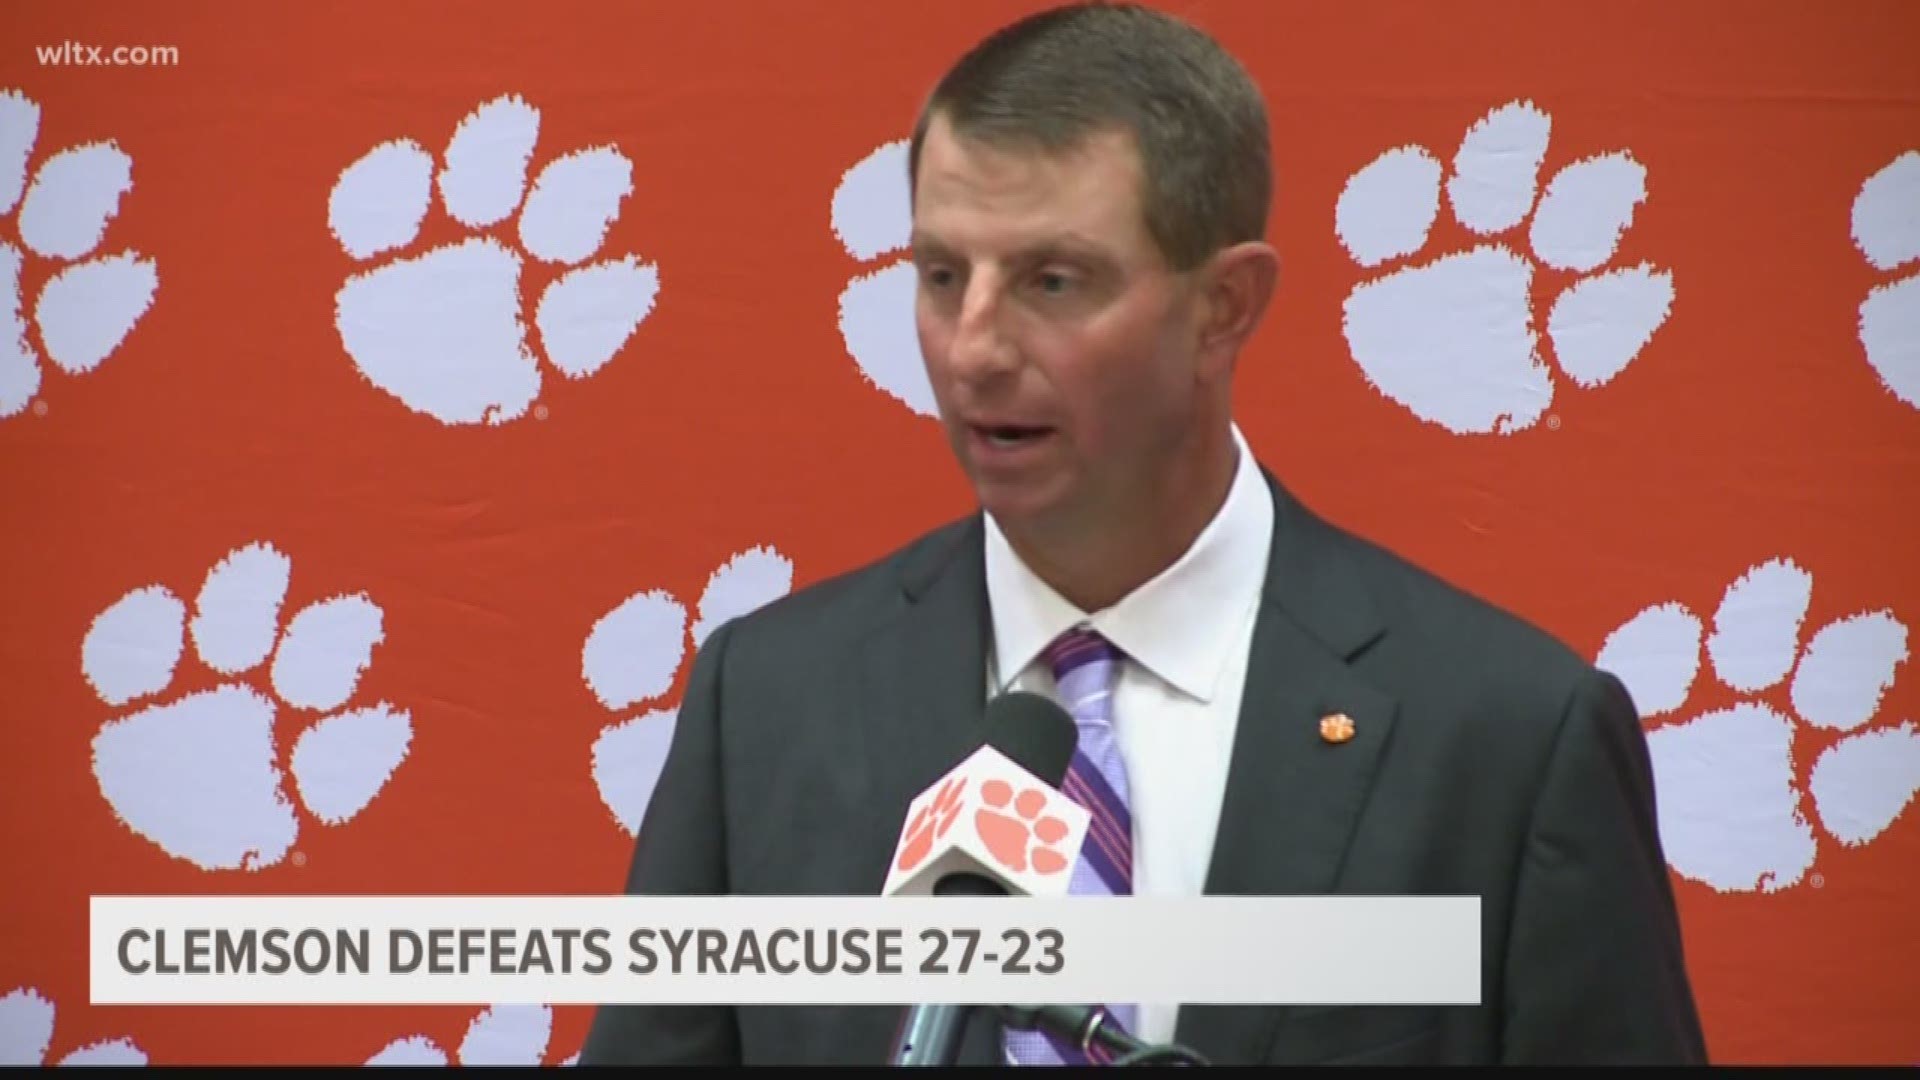 Dabo Swinney, Chase Brice and Travis Etienne talk about the 27-23 win over Syracuse.